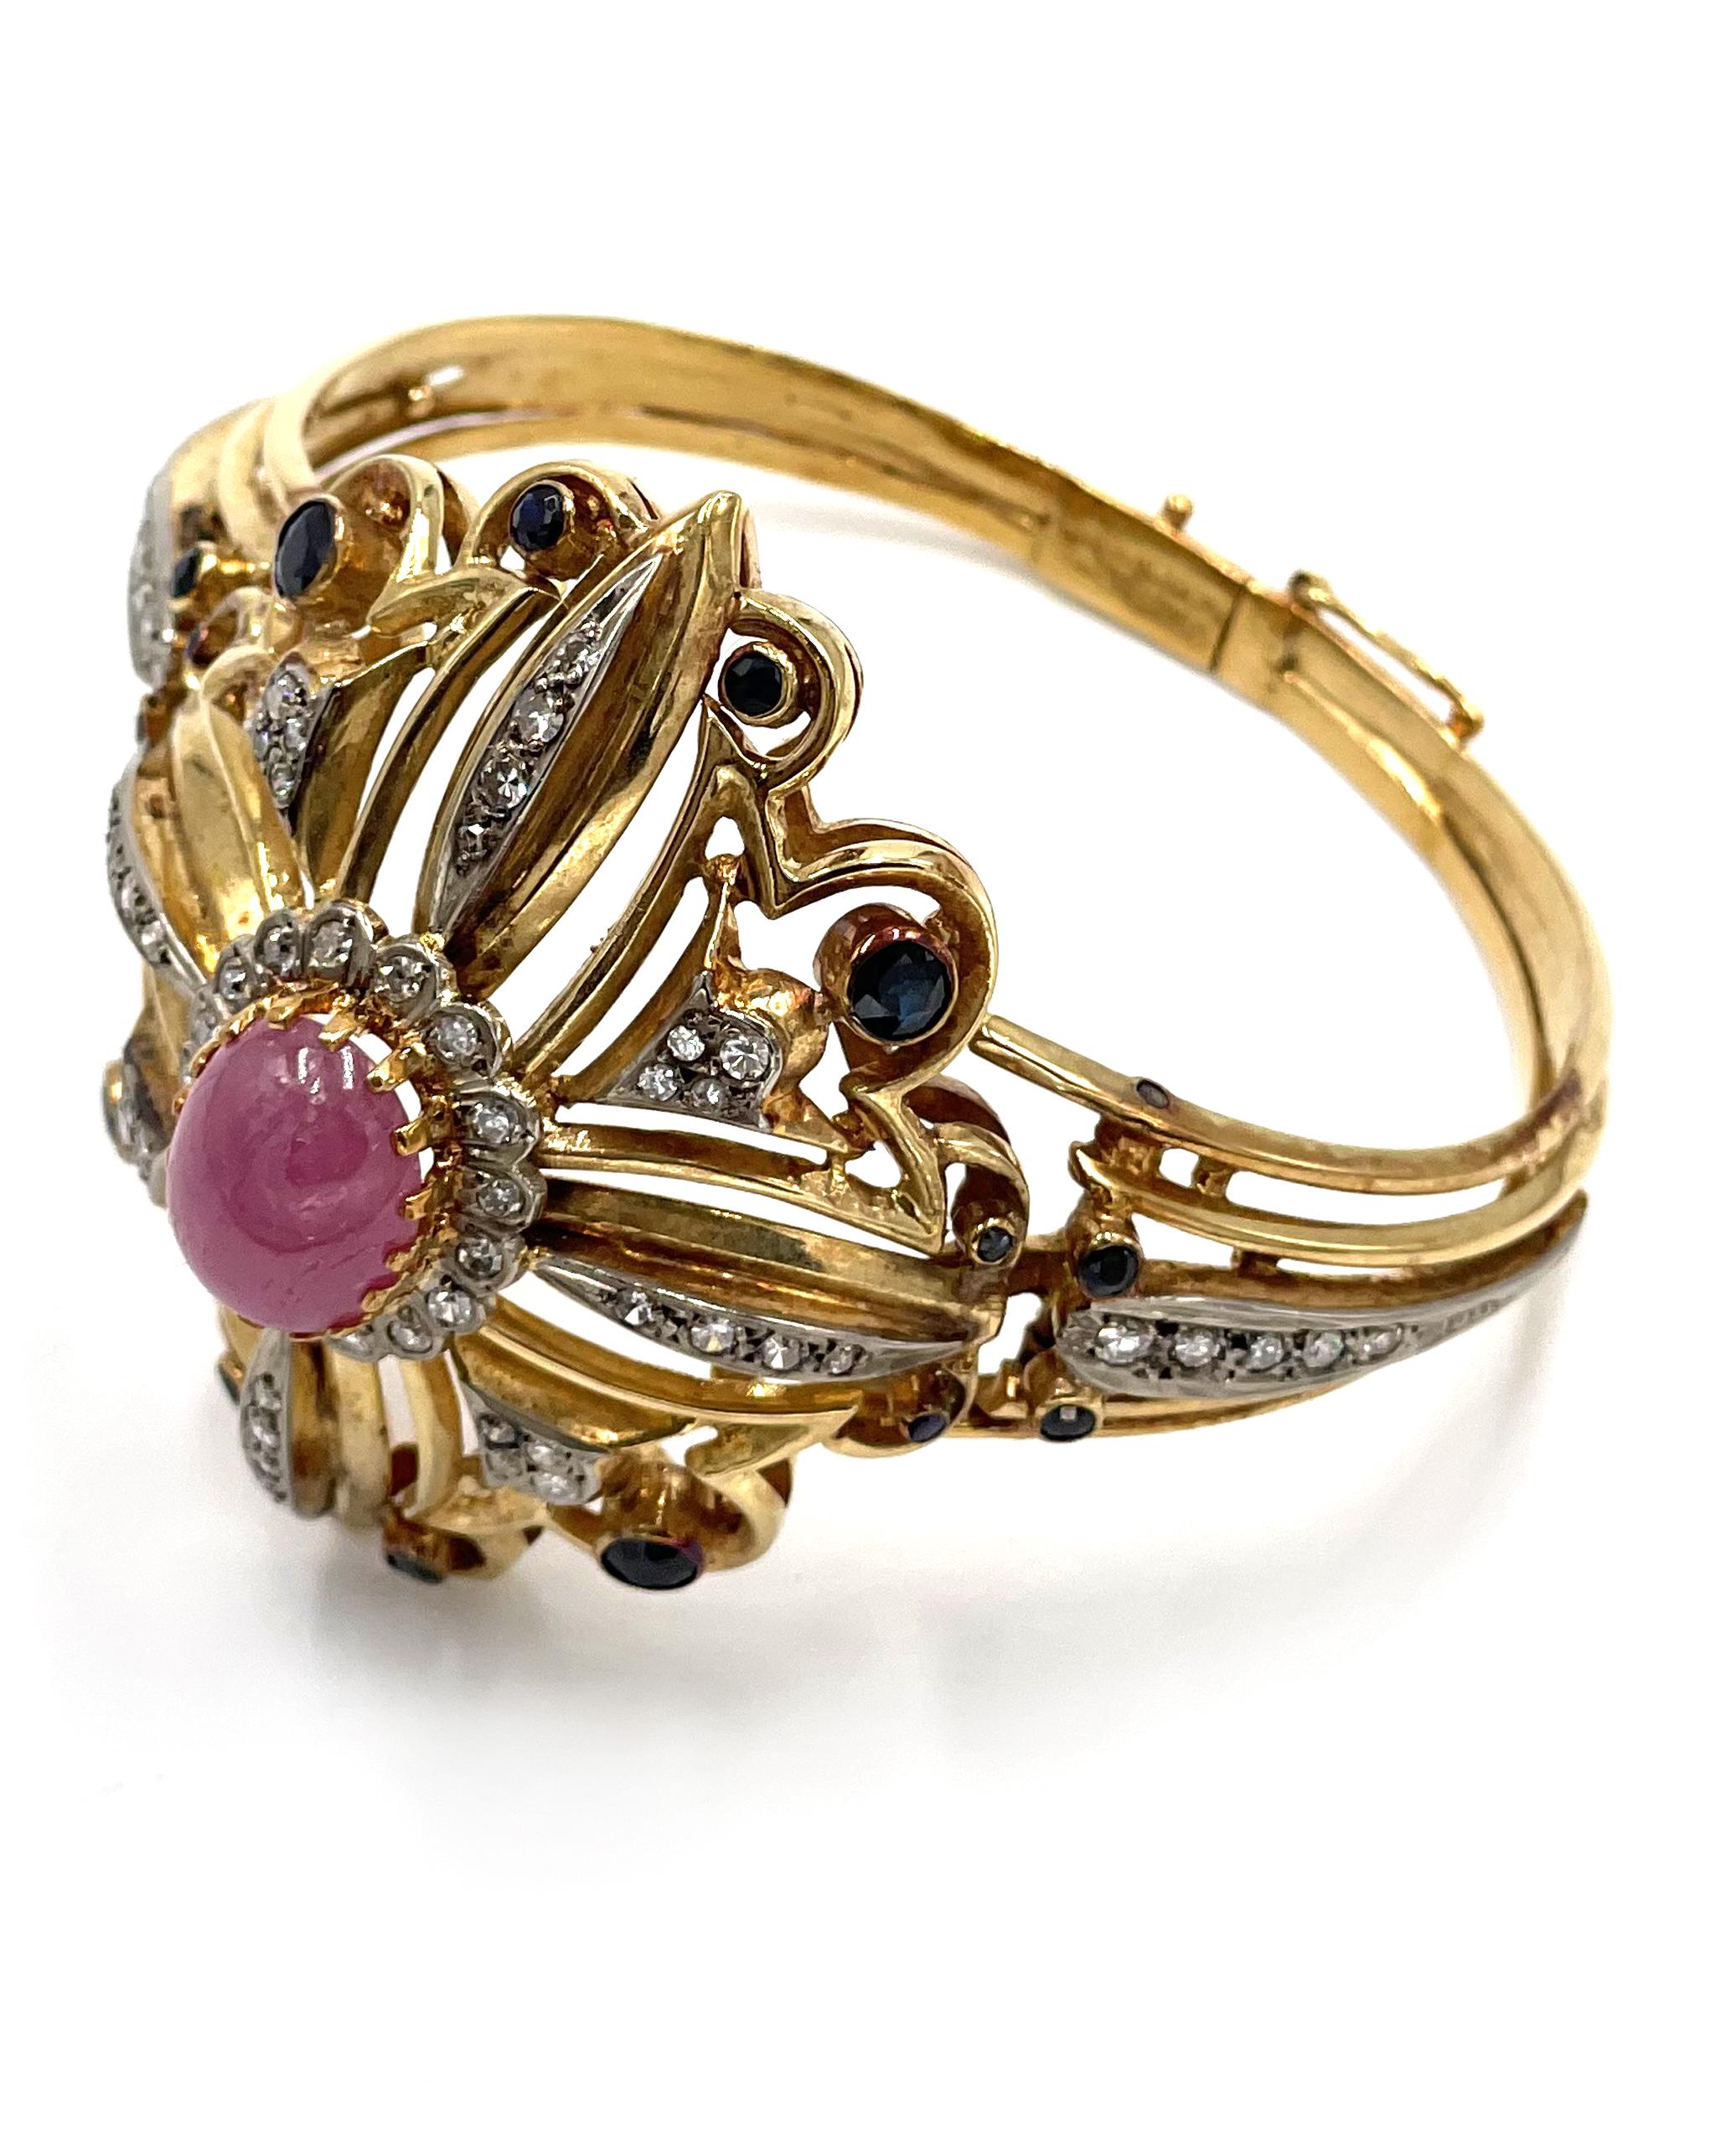 Pre owned vintage estate Ilias Lalaounis 18K yellow gold pink sapphire, blue sapphire and diamond hinged bangle bracelet.  The top center is prong set with one oval cabochon cut pink sapphire measuring approximately 12.75X10.0X4.7mm.  The pink